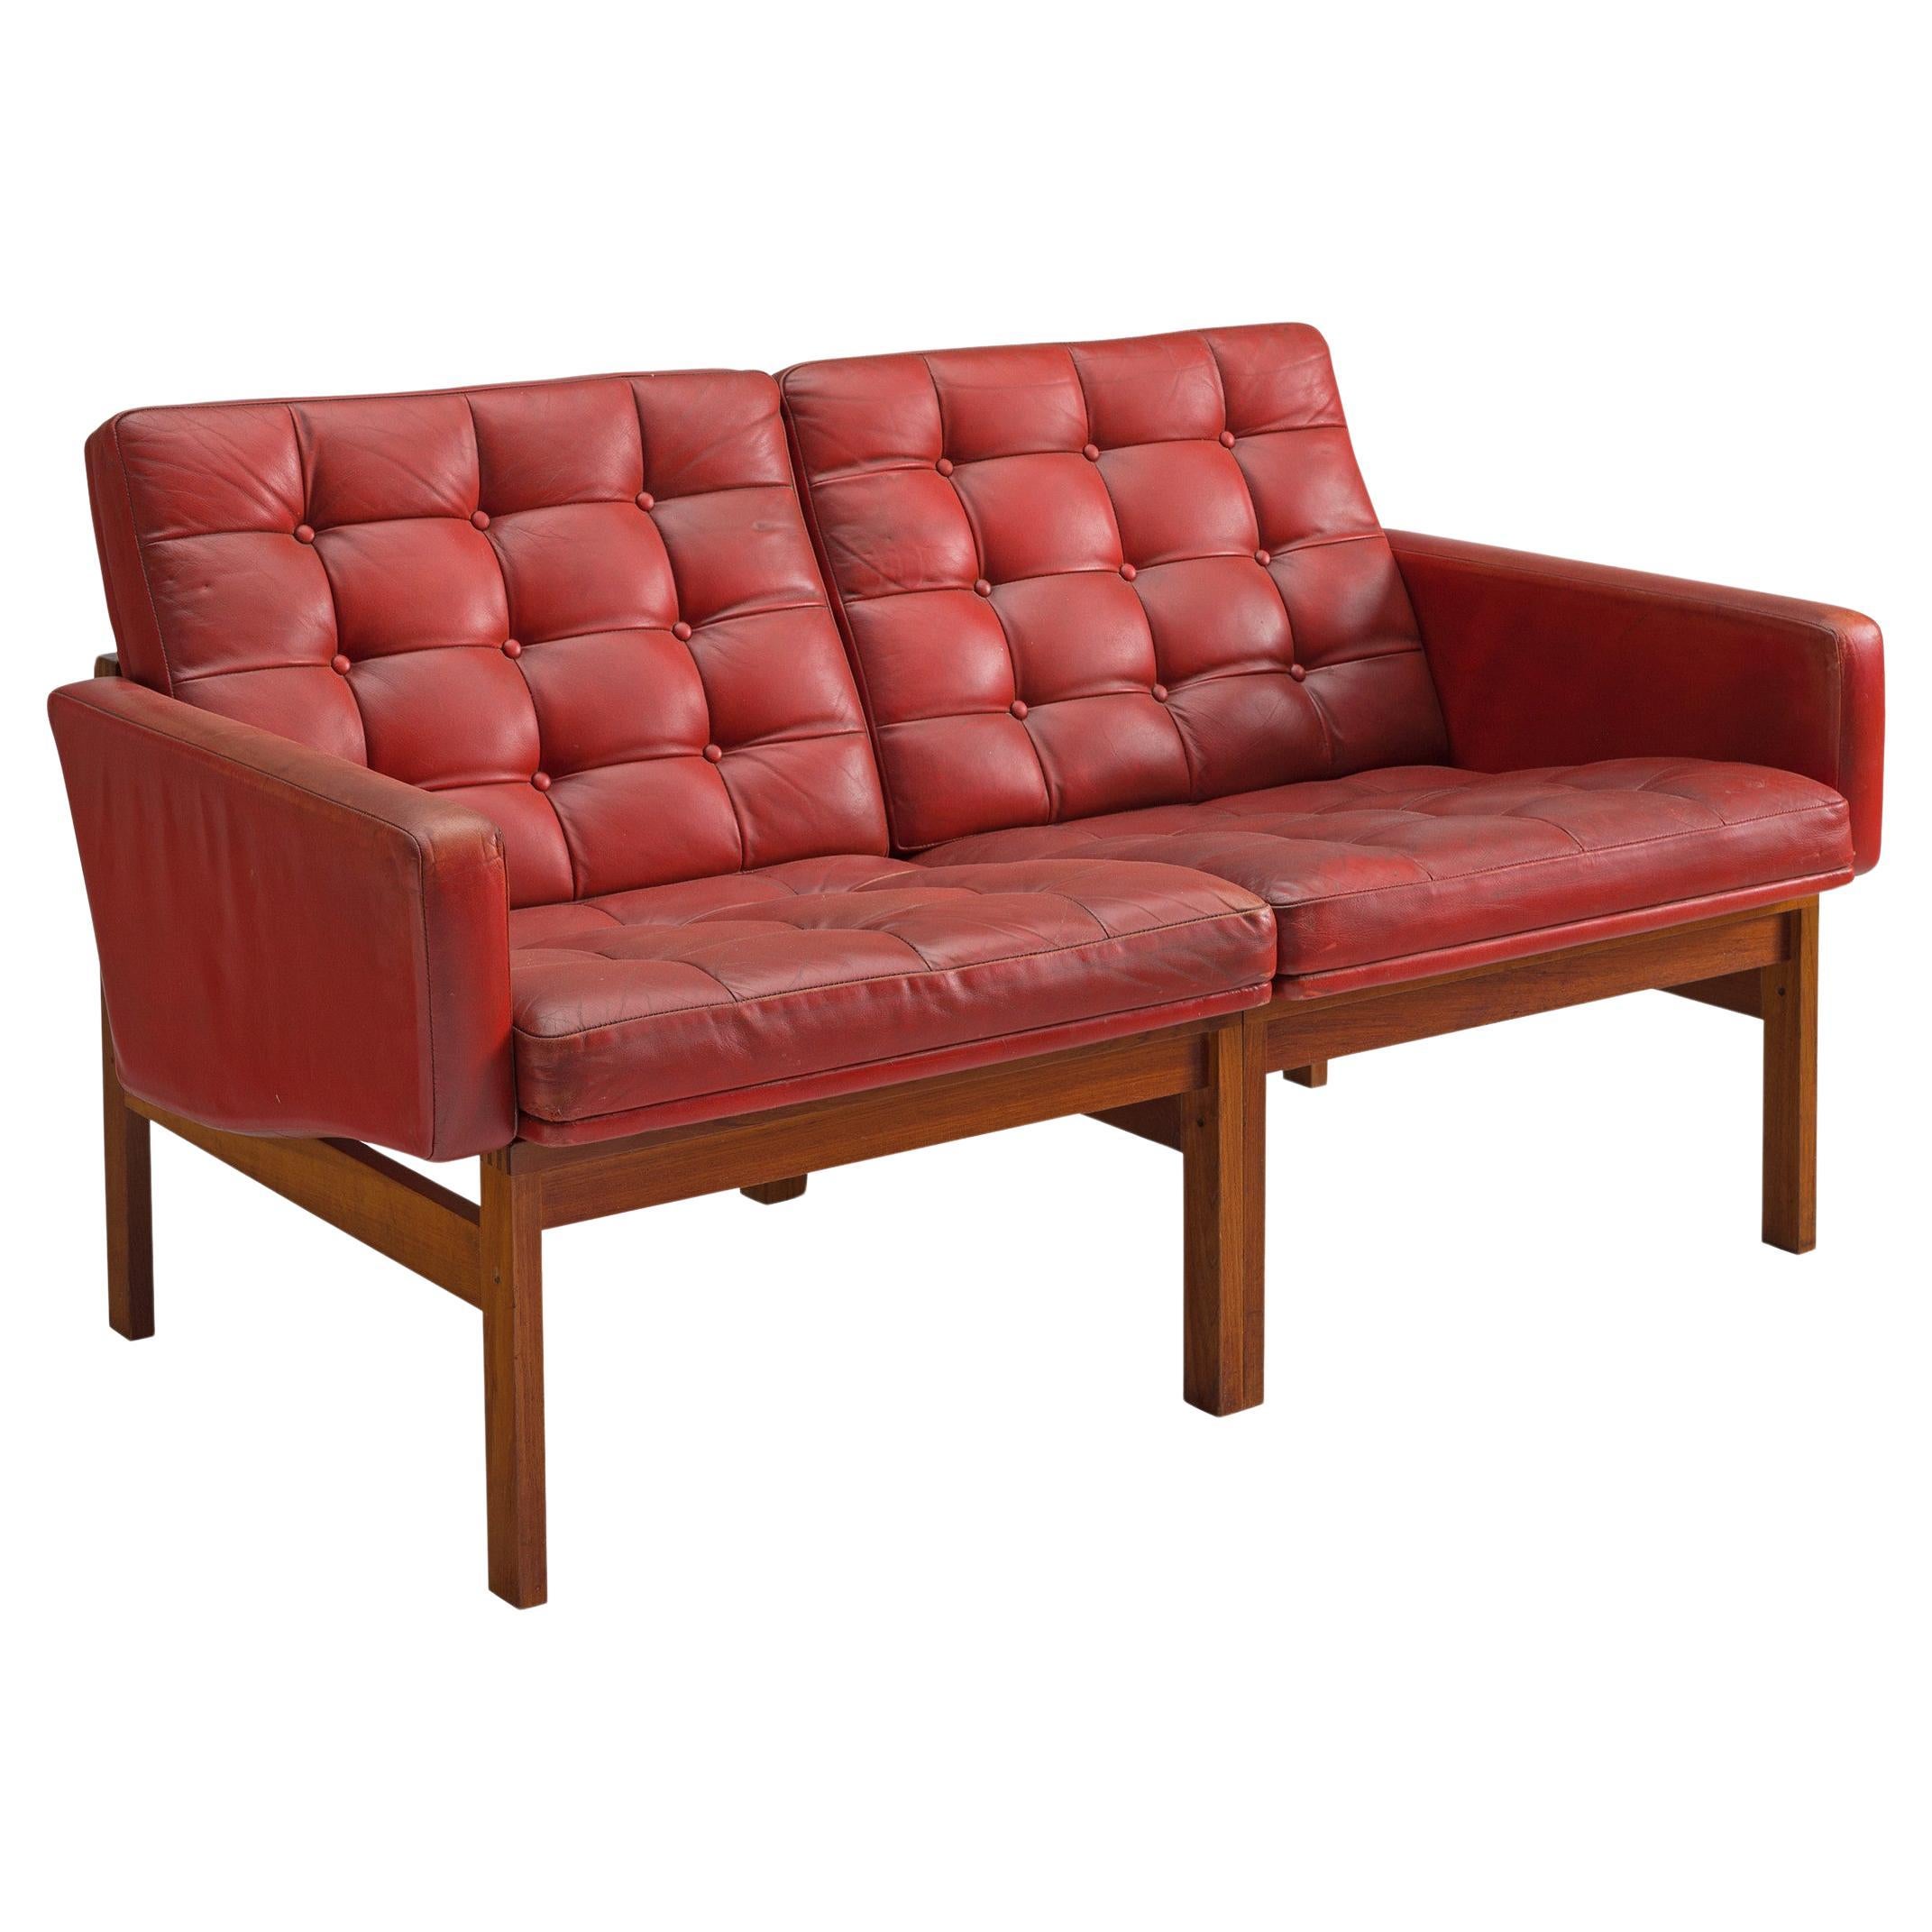 Ole Gjerløv-Knudsen & Torben Lind Two Seater Sofa in Red Leather and Teak  For Sale